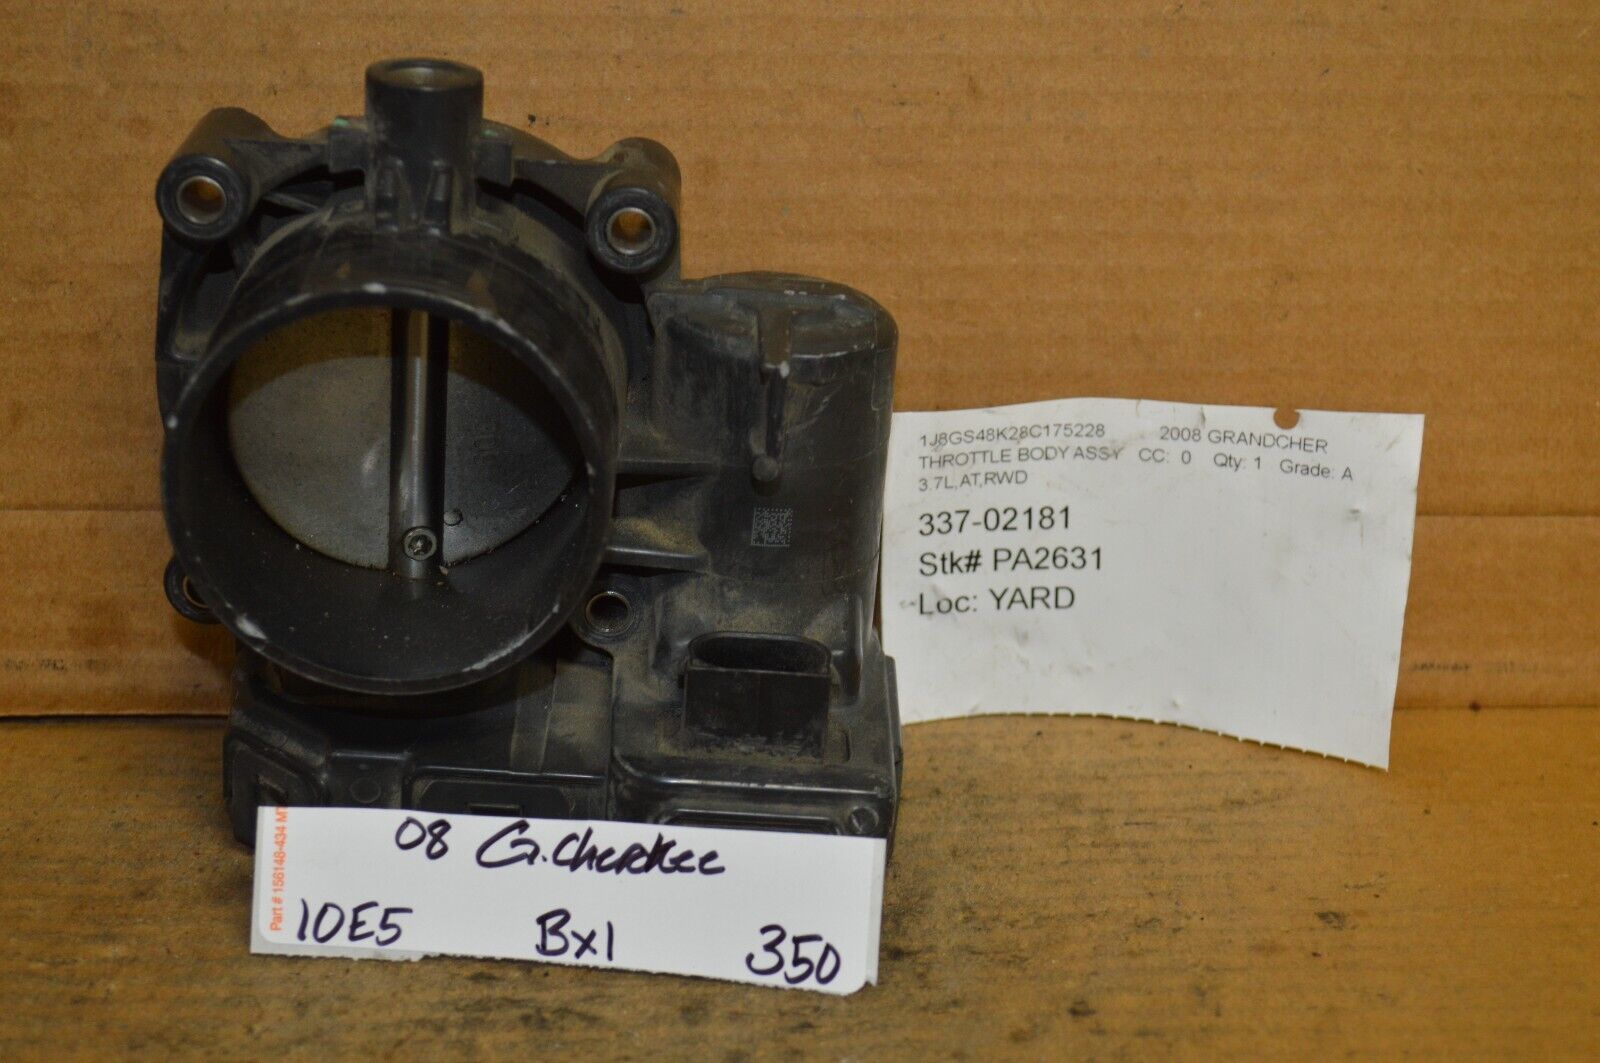 07-10 Jeep Commander 3.7L AT Throttle Body OEM 04861661AA Assembly 350-10E5 Bx 1 - $24.99